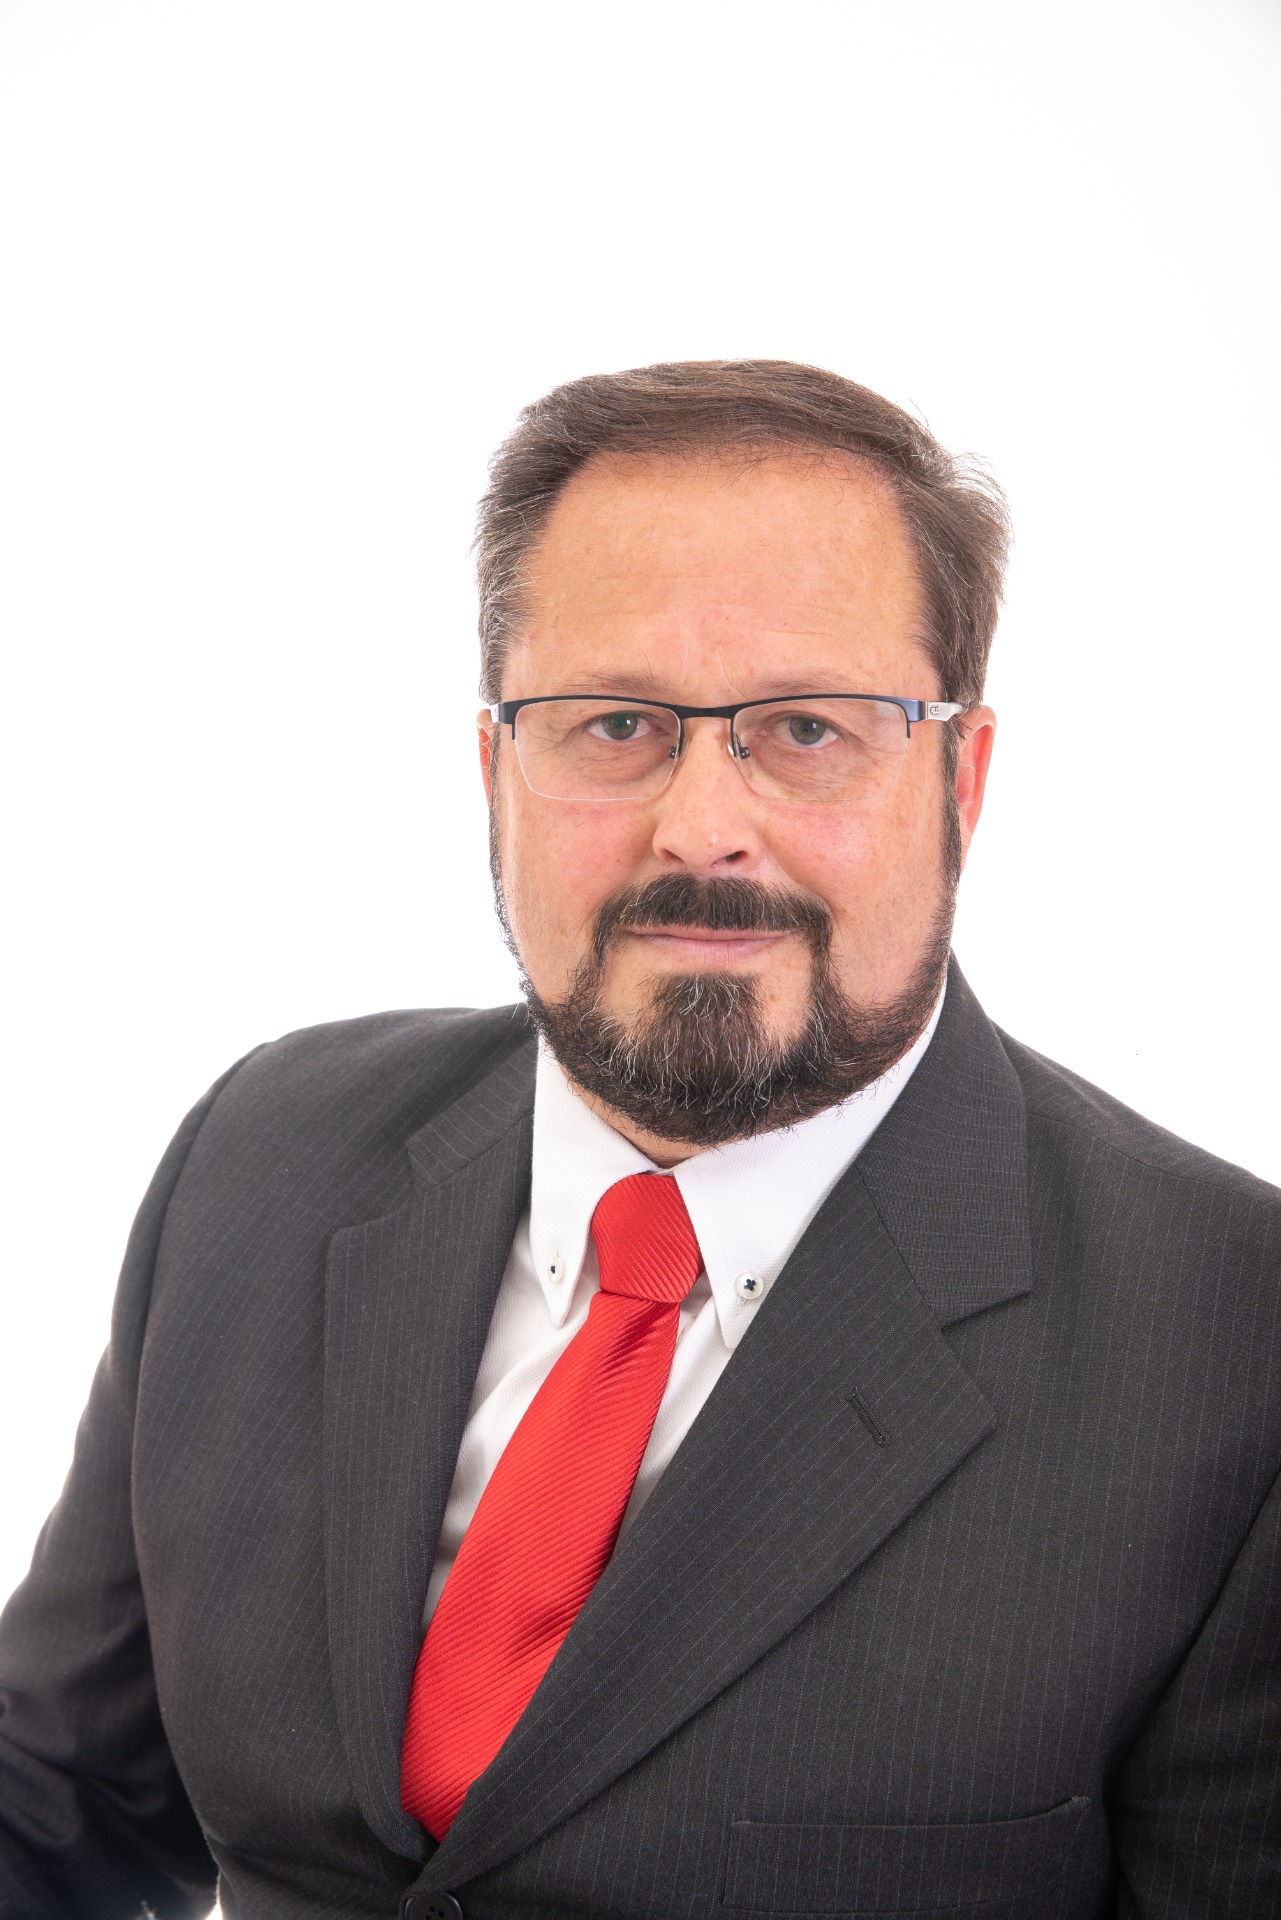 Candidato Adriano Martins Rodrigues